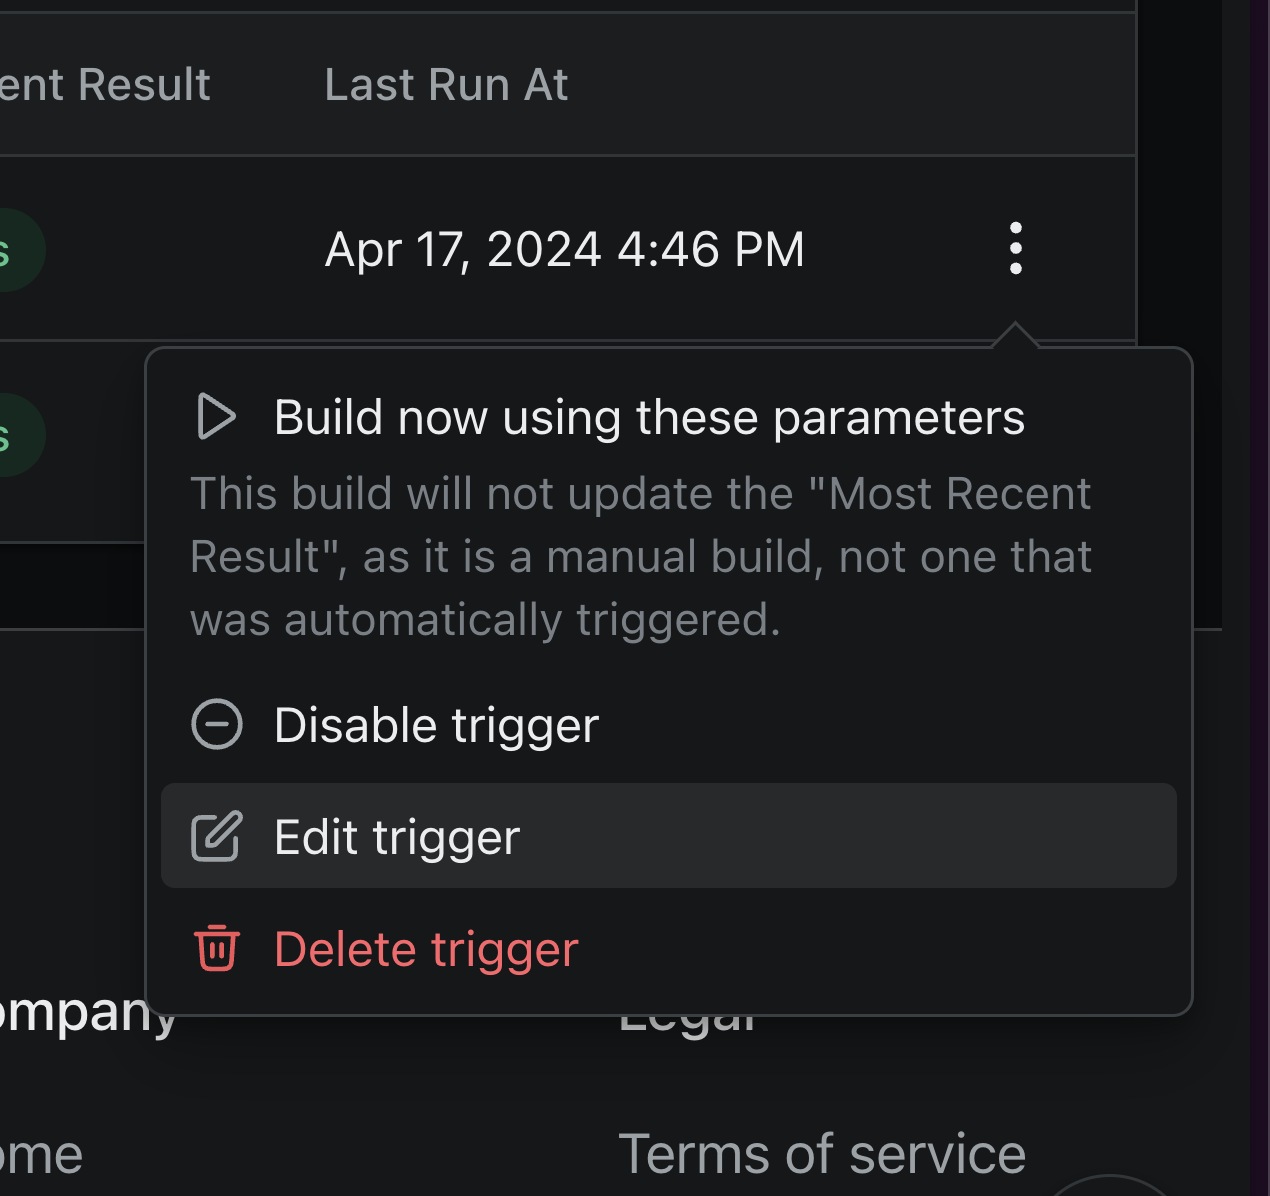 The options button on the build trigger row